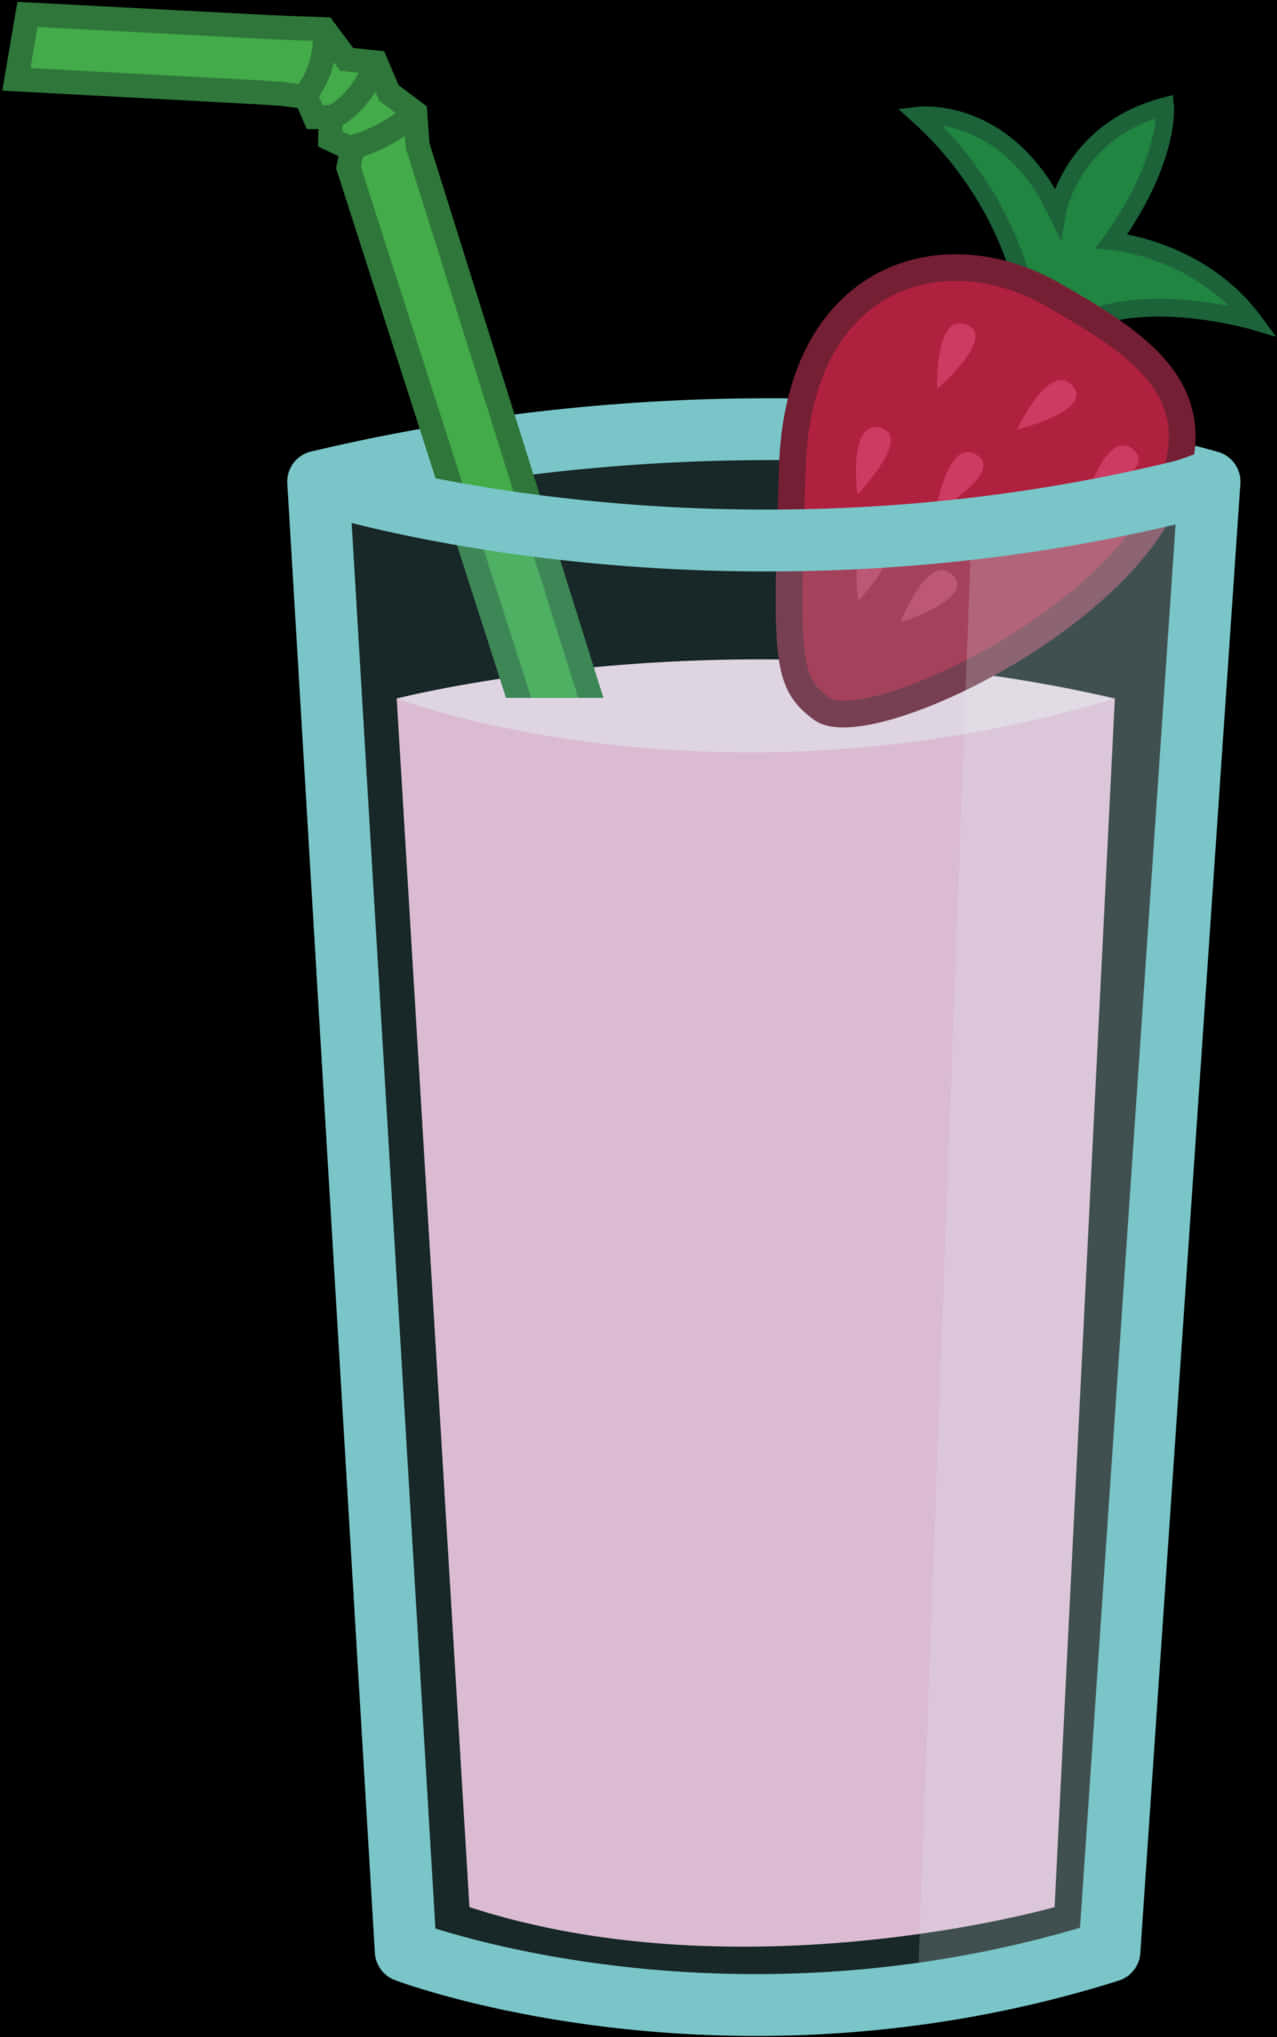 A Glass Of Milk With A Strawberry And A Straw